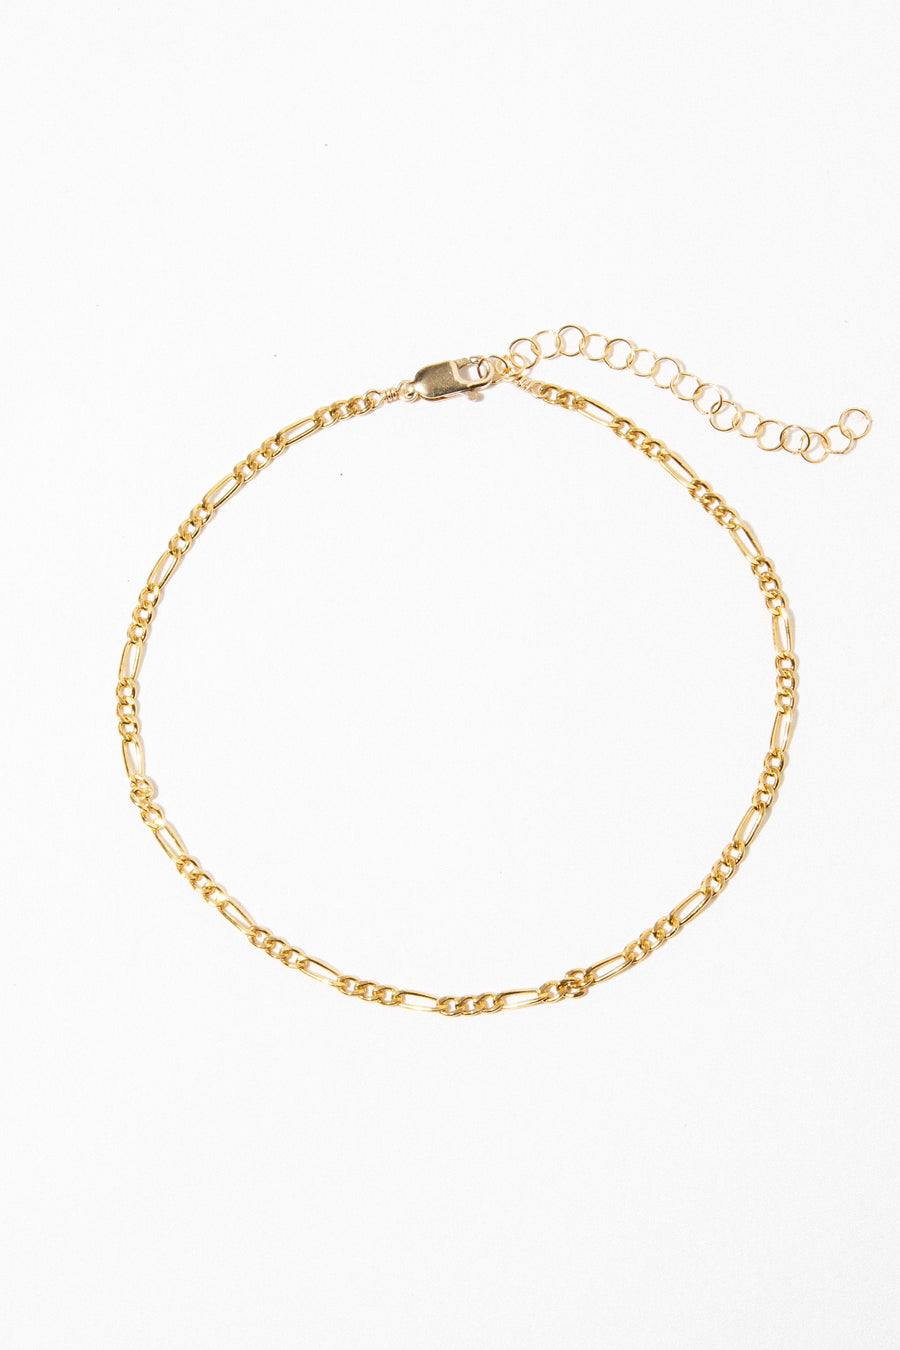 CGM Jewelry Gold Piccolo Anklet